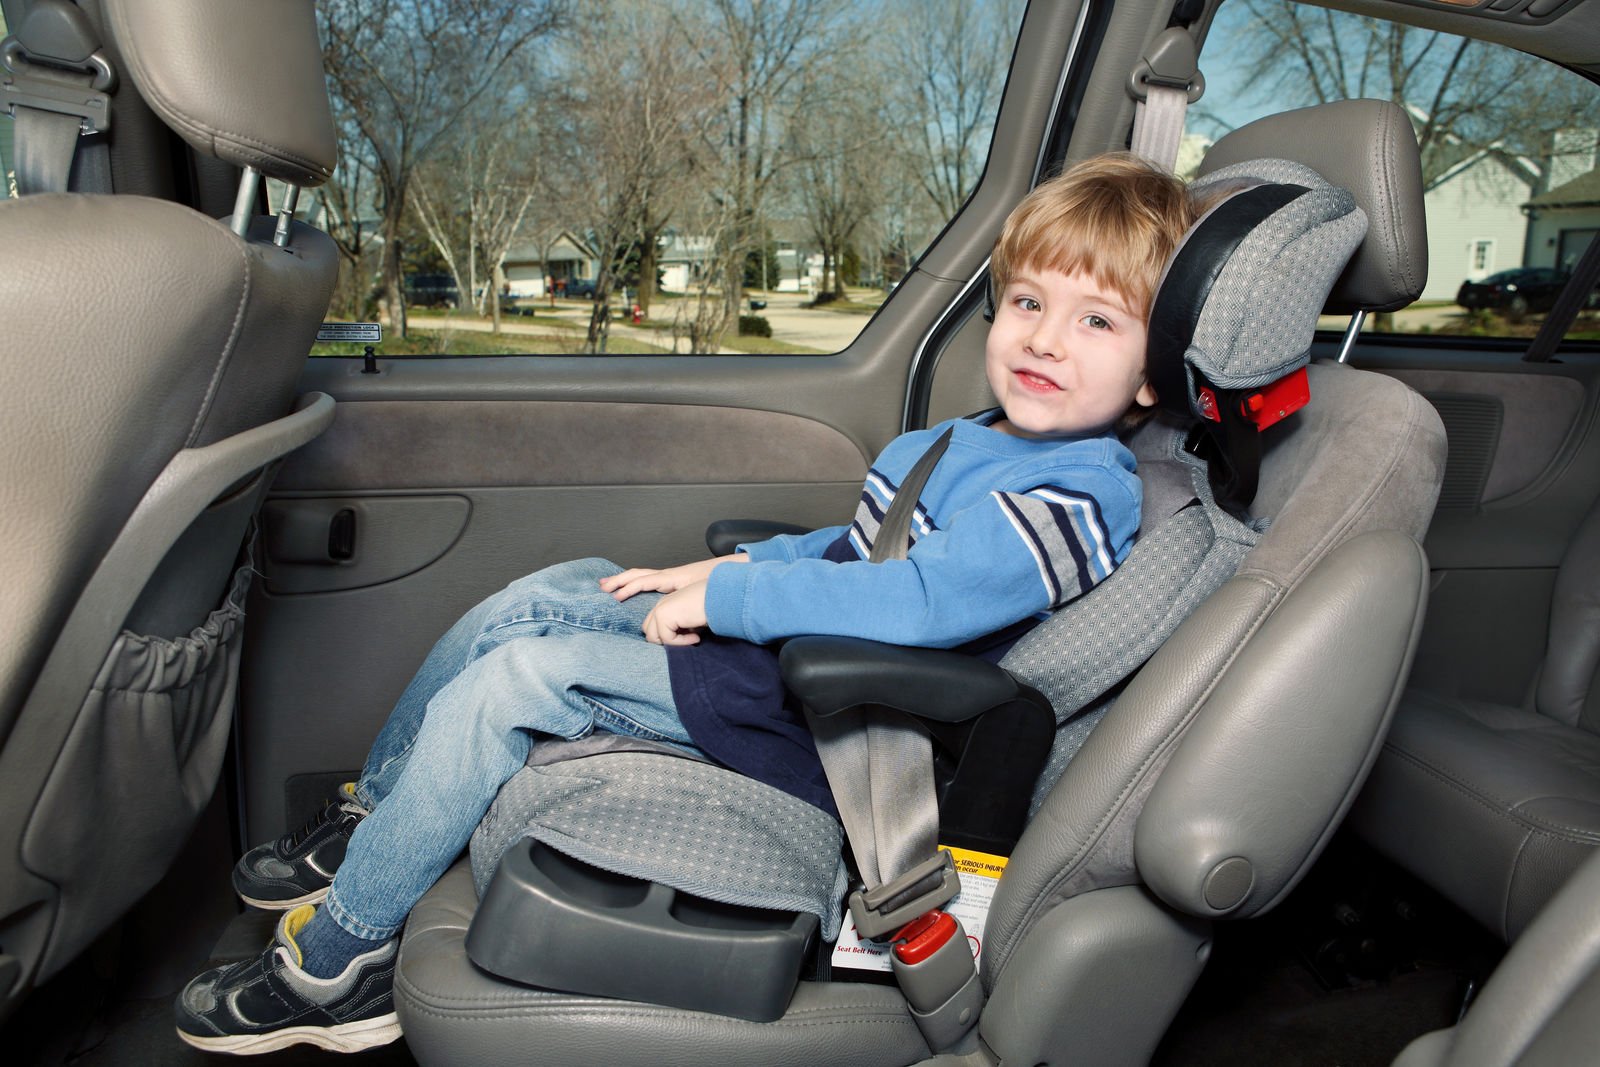 Does Car Insurance Cover Car Seats?